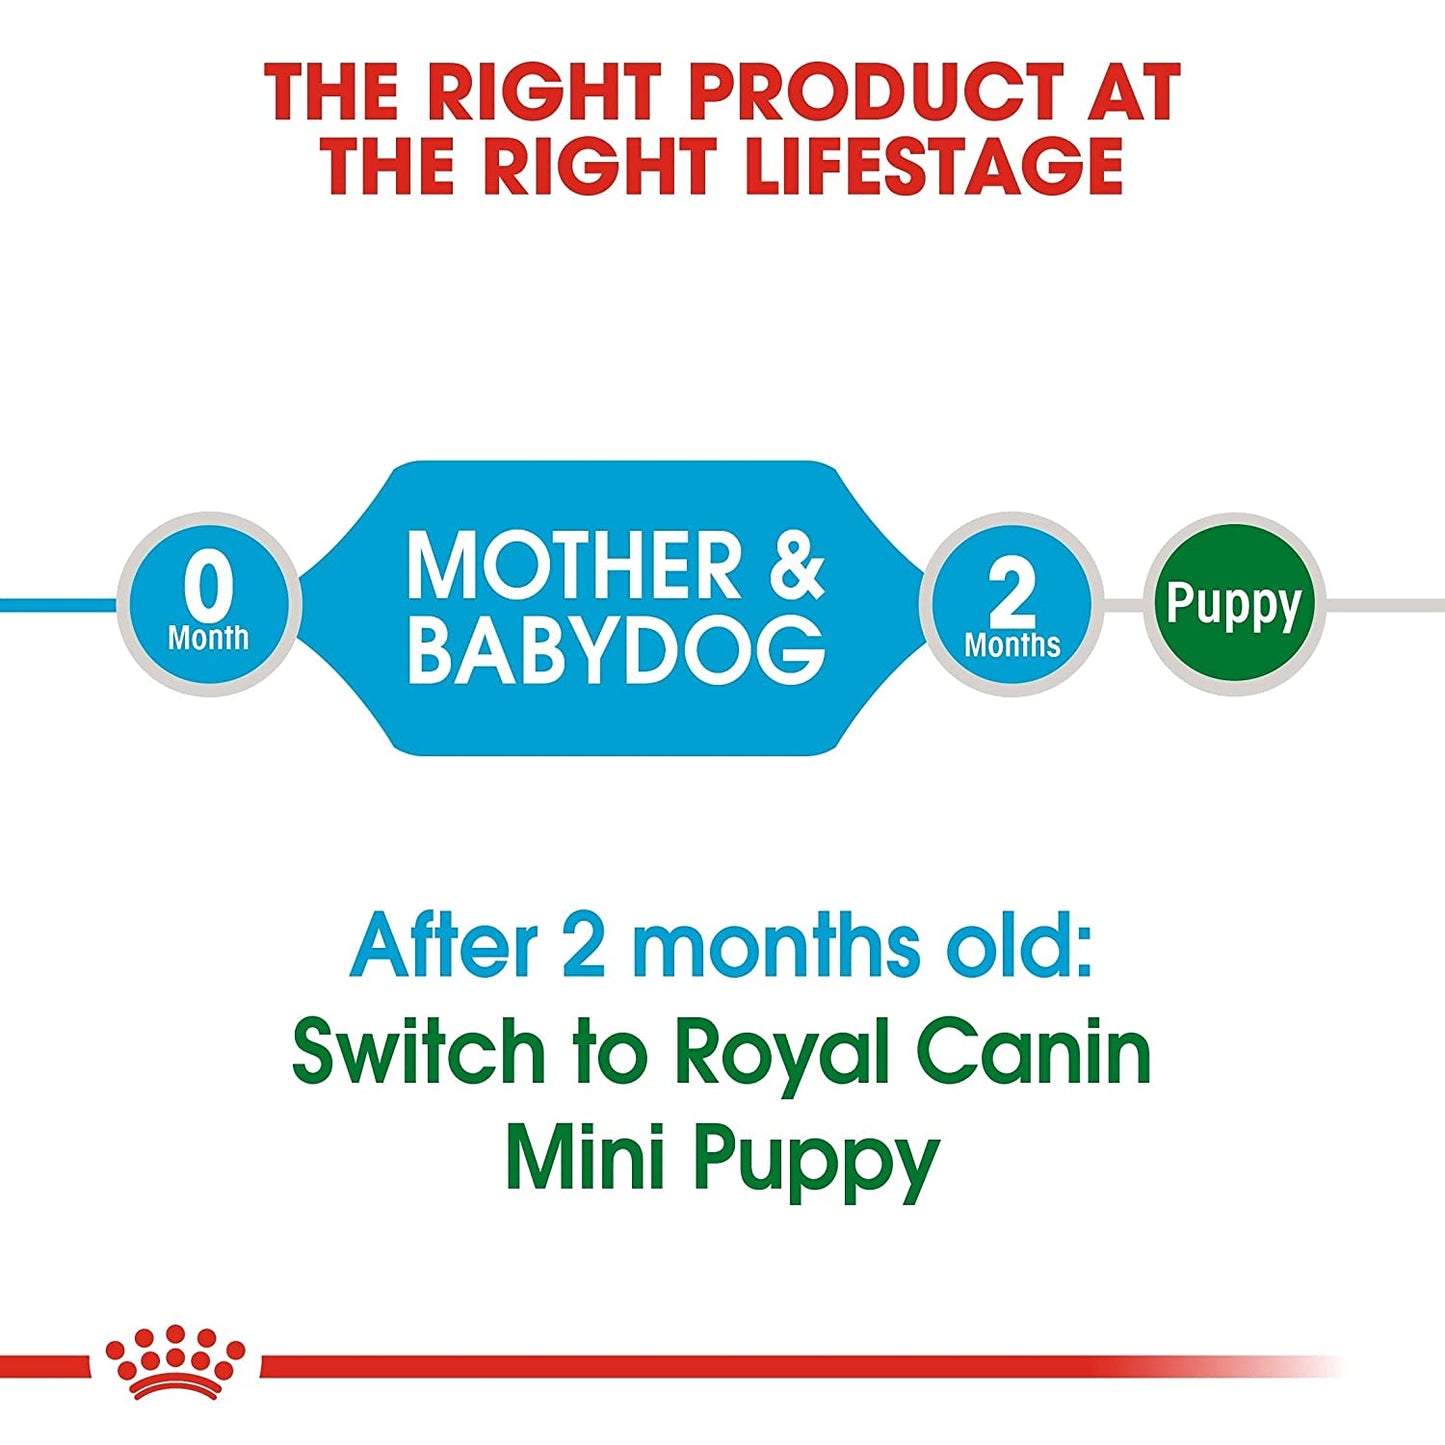 Royal Canin Mini Starter Mother & Puppy Dry Food